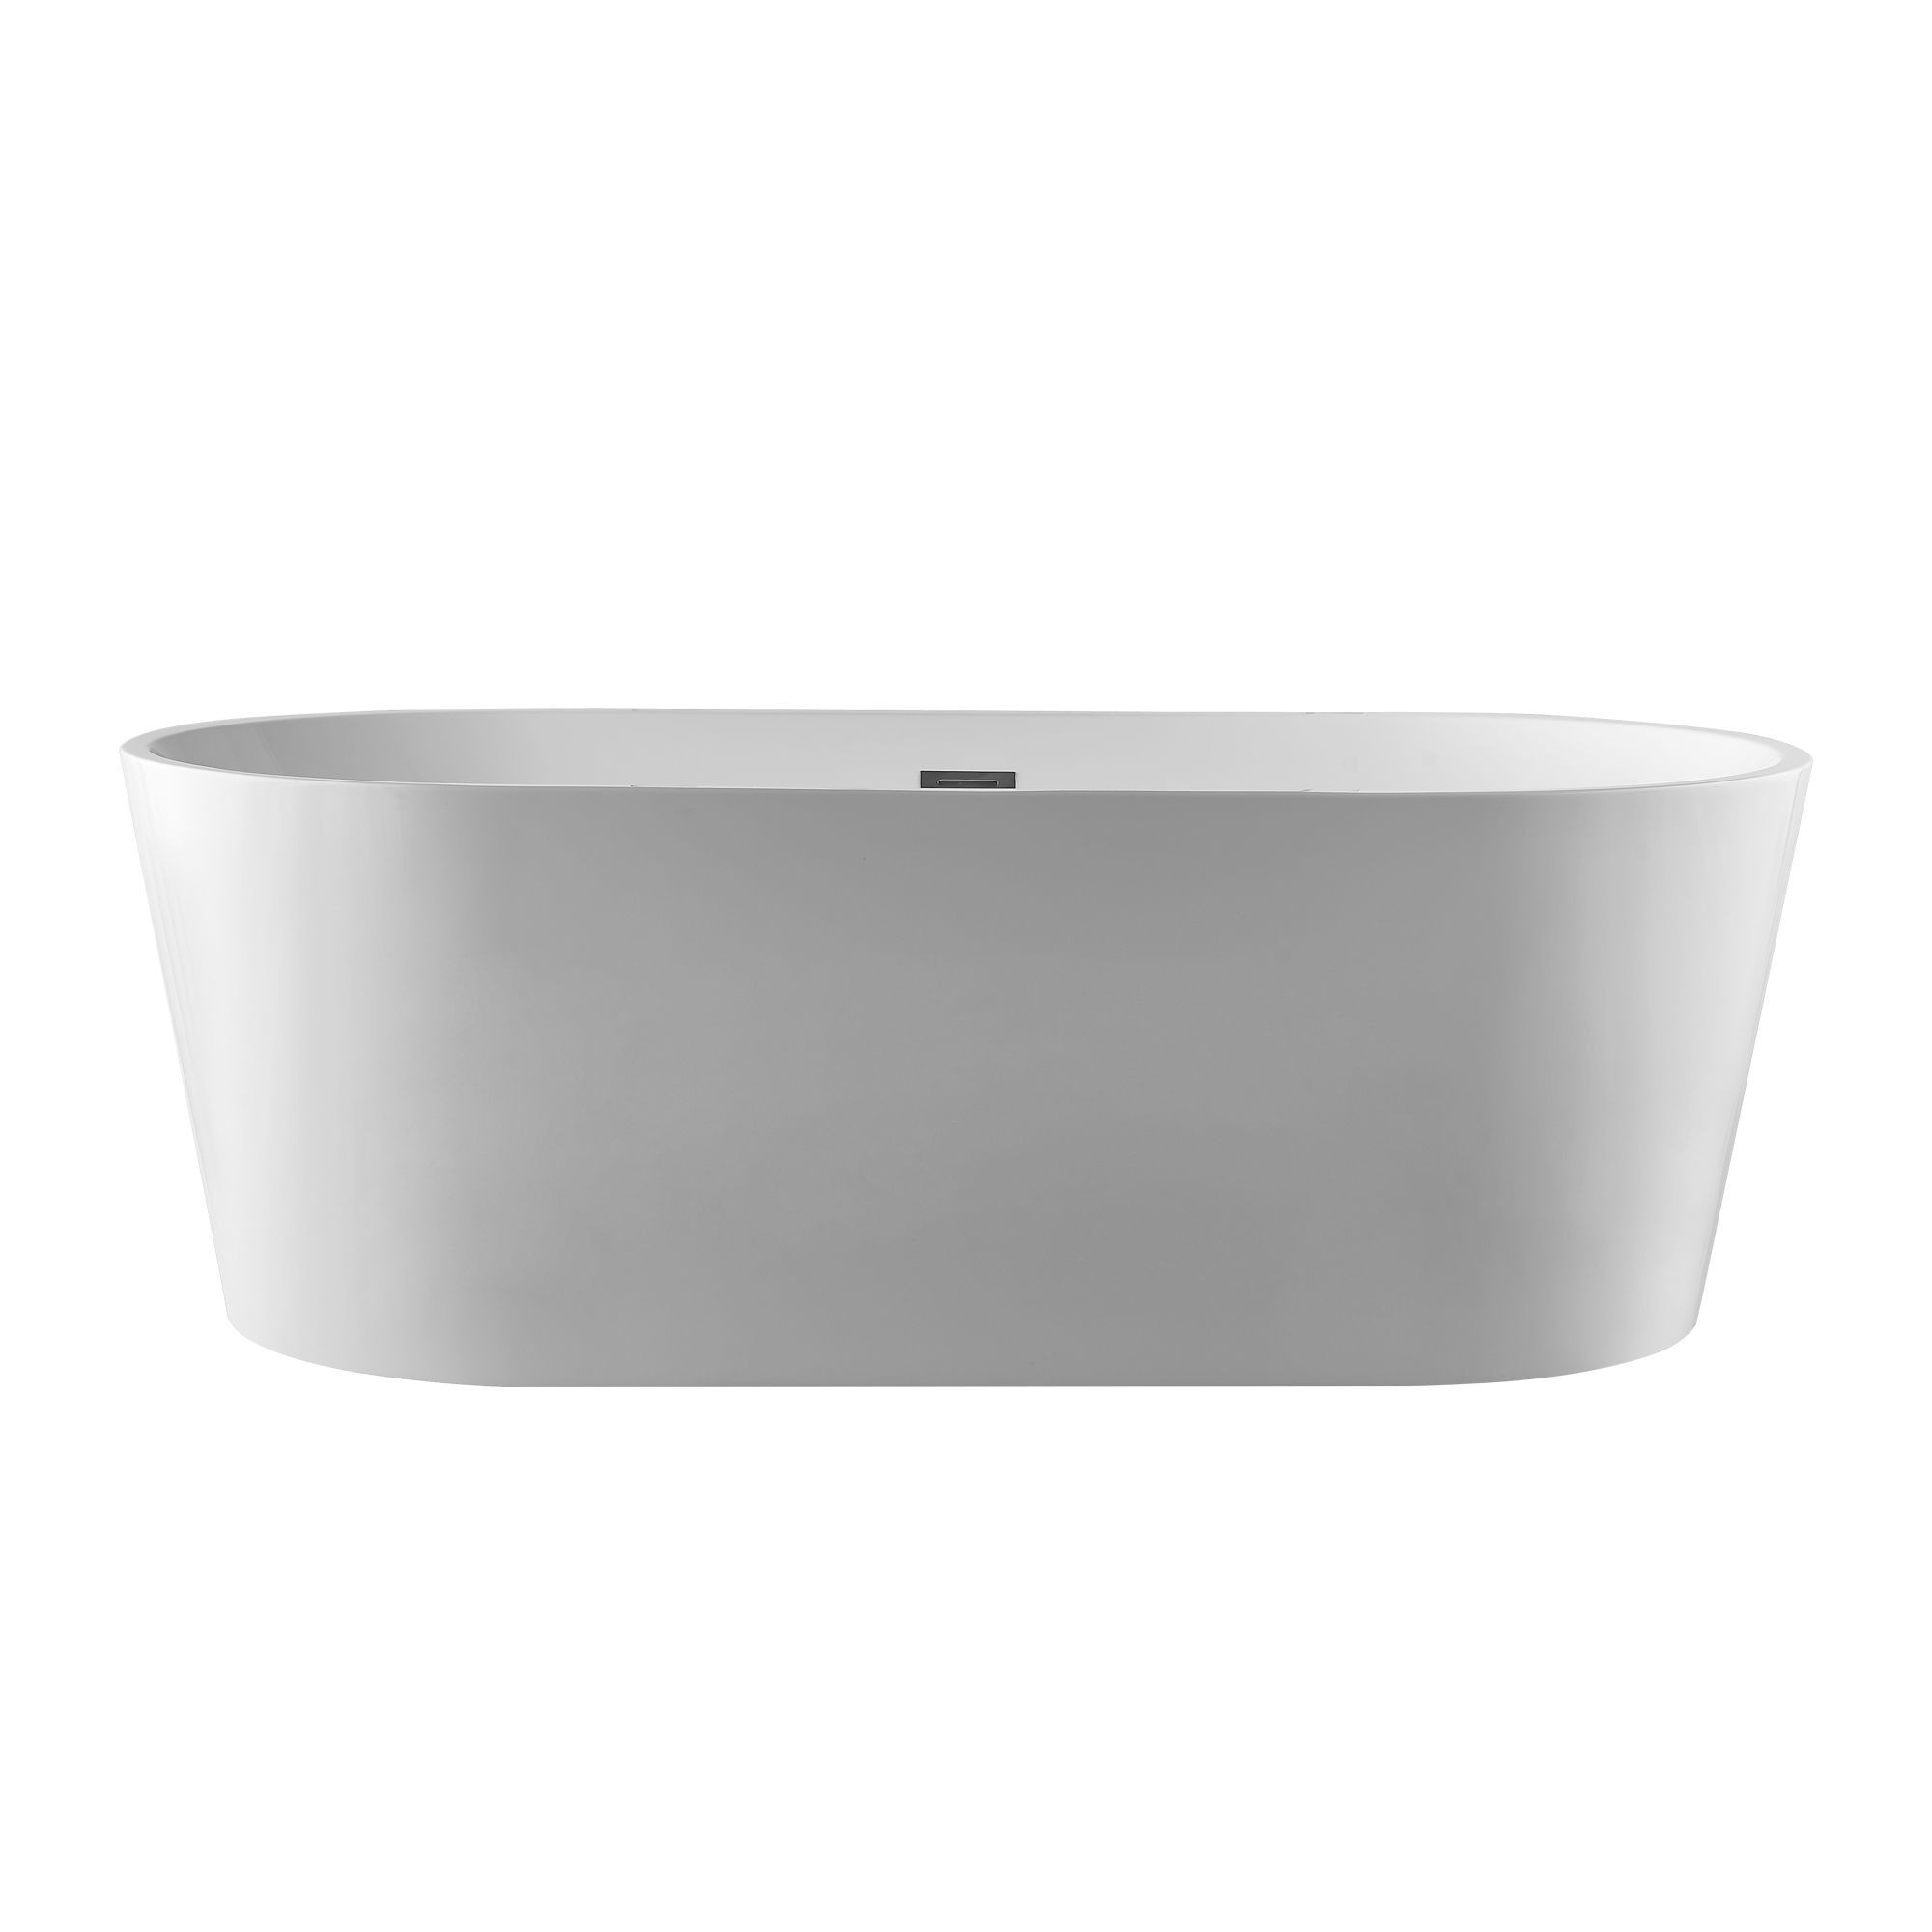 VANITY ART VA6901-L 67 INCH FREESTANDING ACRYLIC SOAKING BATHTUB WITH POLISHED CHROME SLOTTED OVERFLOW AND POP-UP DRAIN - WHITE